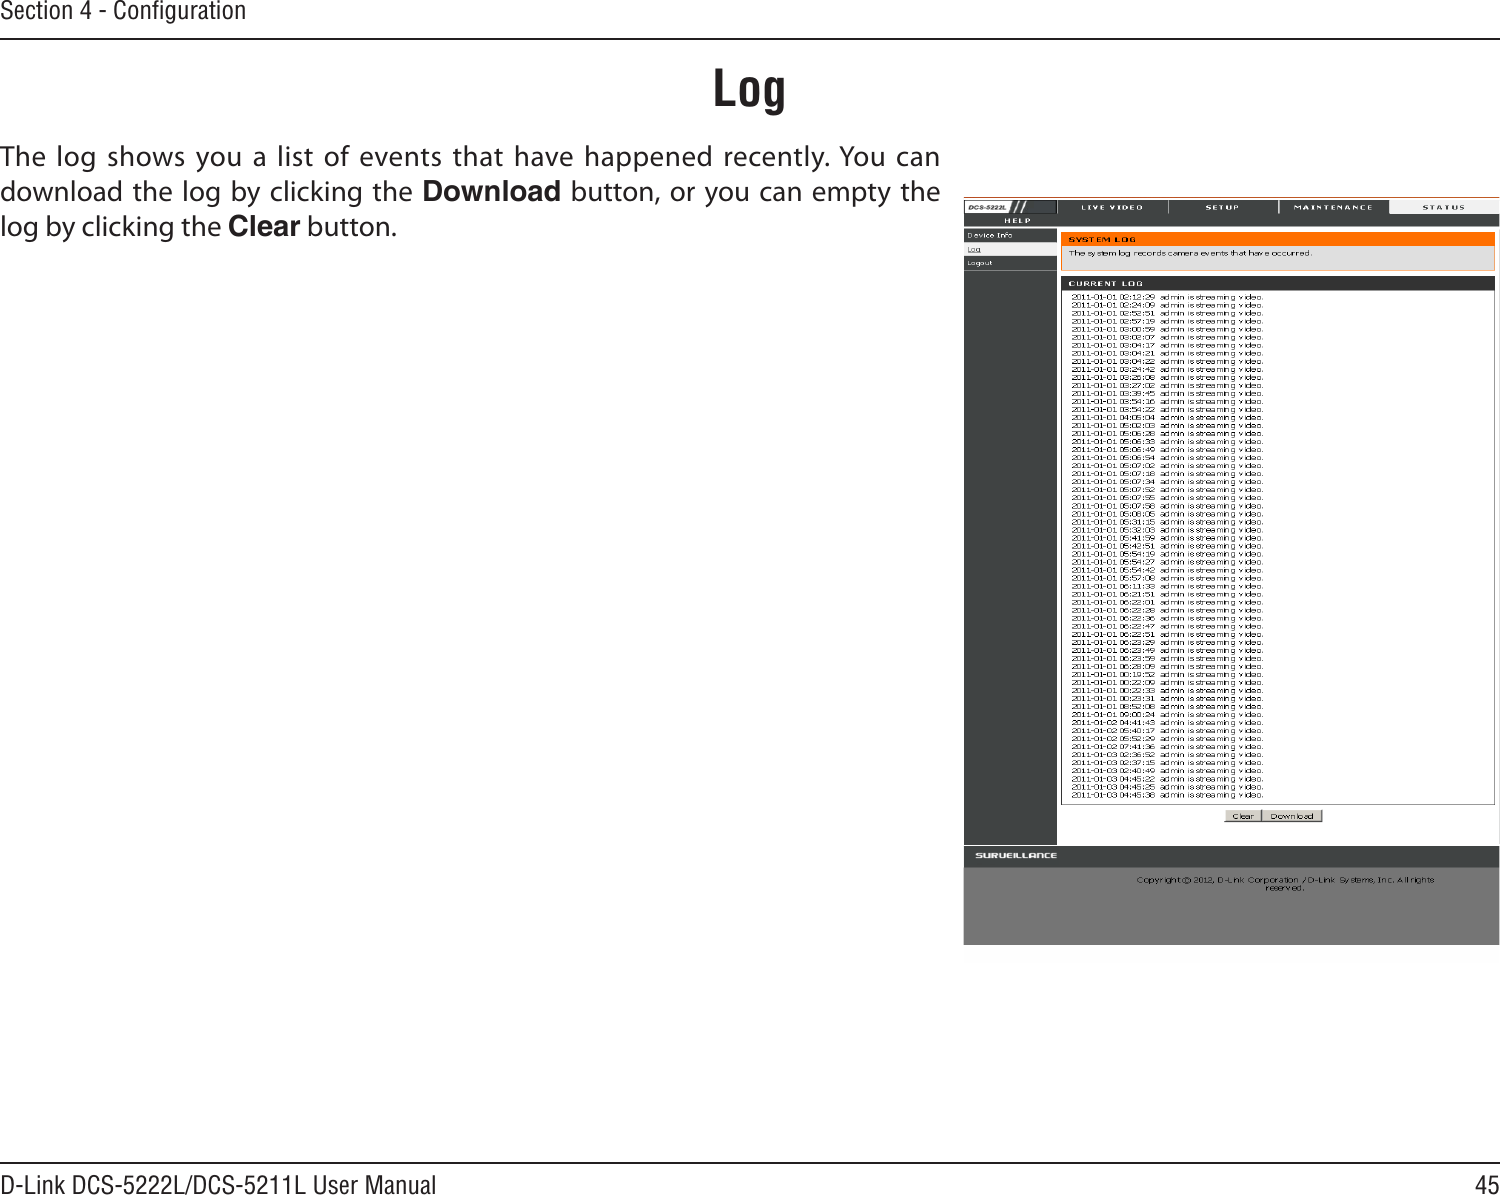 45D-Link DCS-5222L/DCS-5211L User ManualSection 4 - ConﬁgurationThe log shows you a list of events that have happened recently. You can download the log by clicking the Download button, or you can empty the log by clicking the Clear button.Log